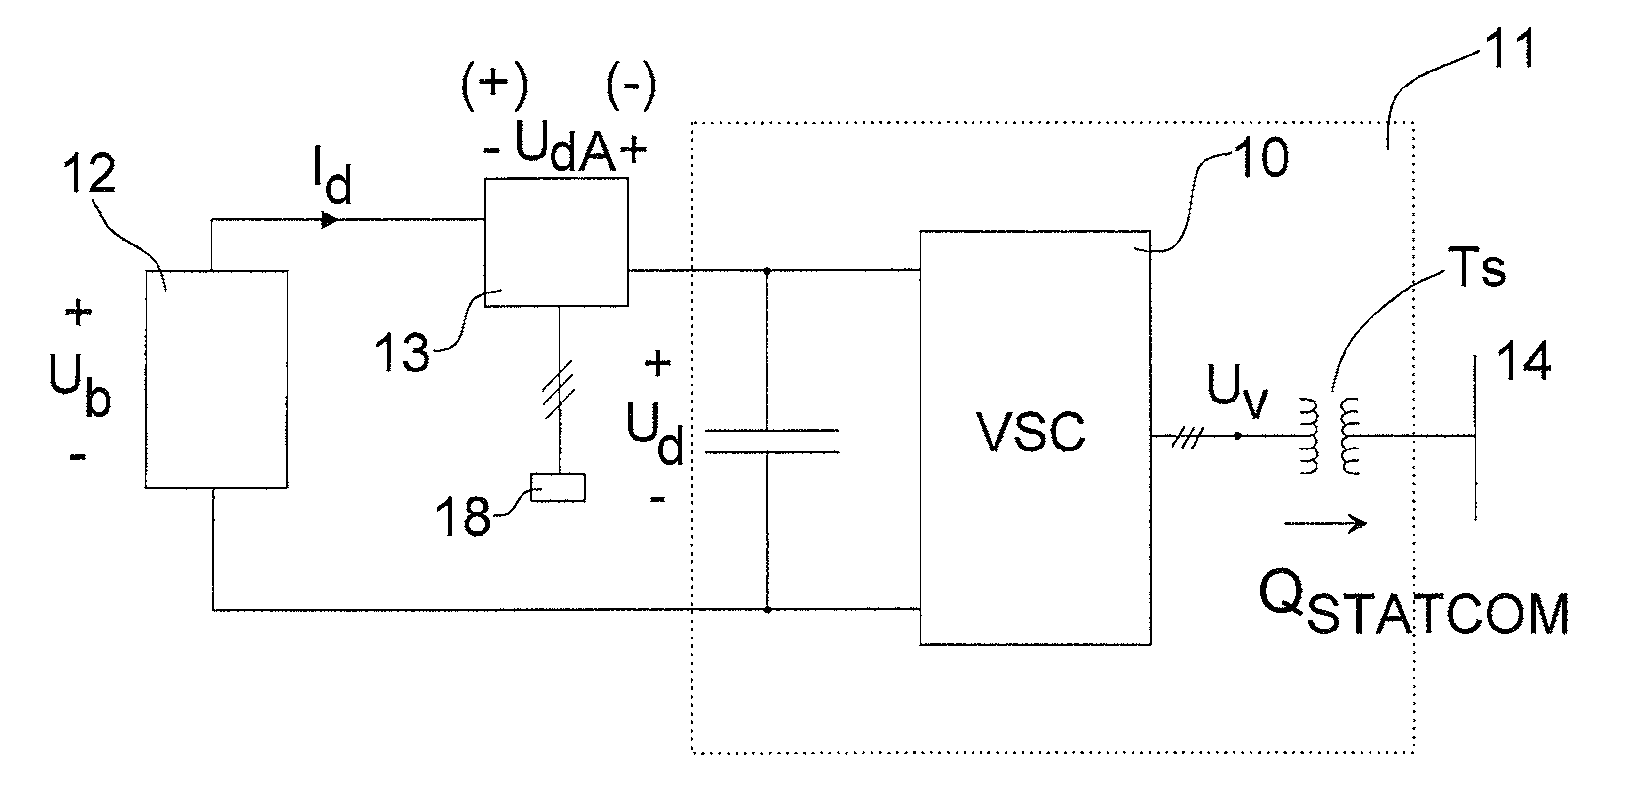 STATCOM system for providing reactive and/or active power to a power network